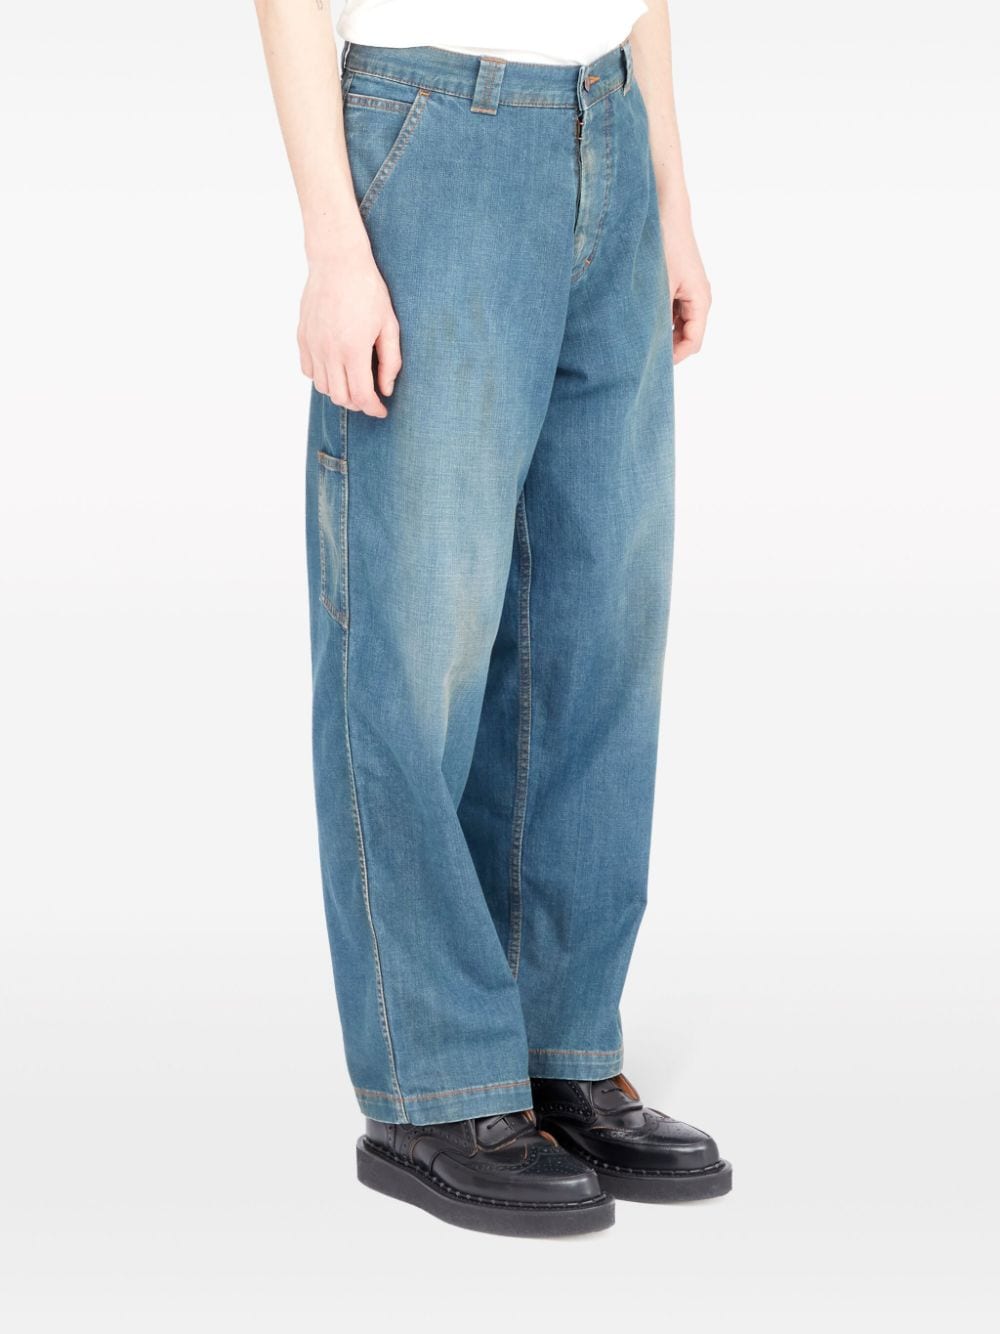 Jeans with American wash